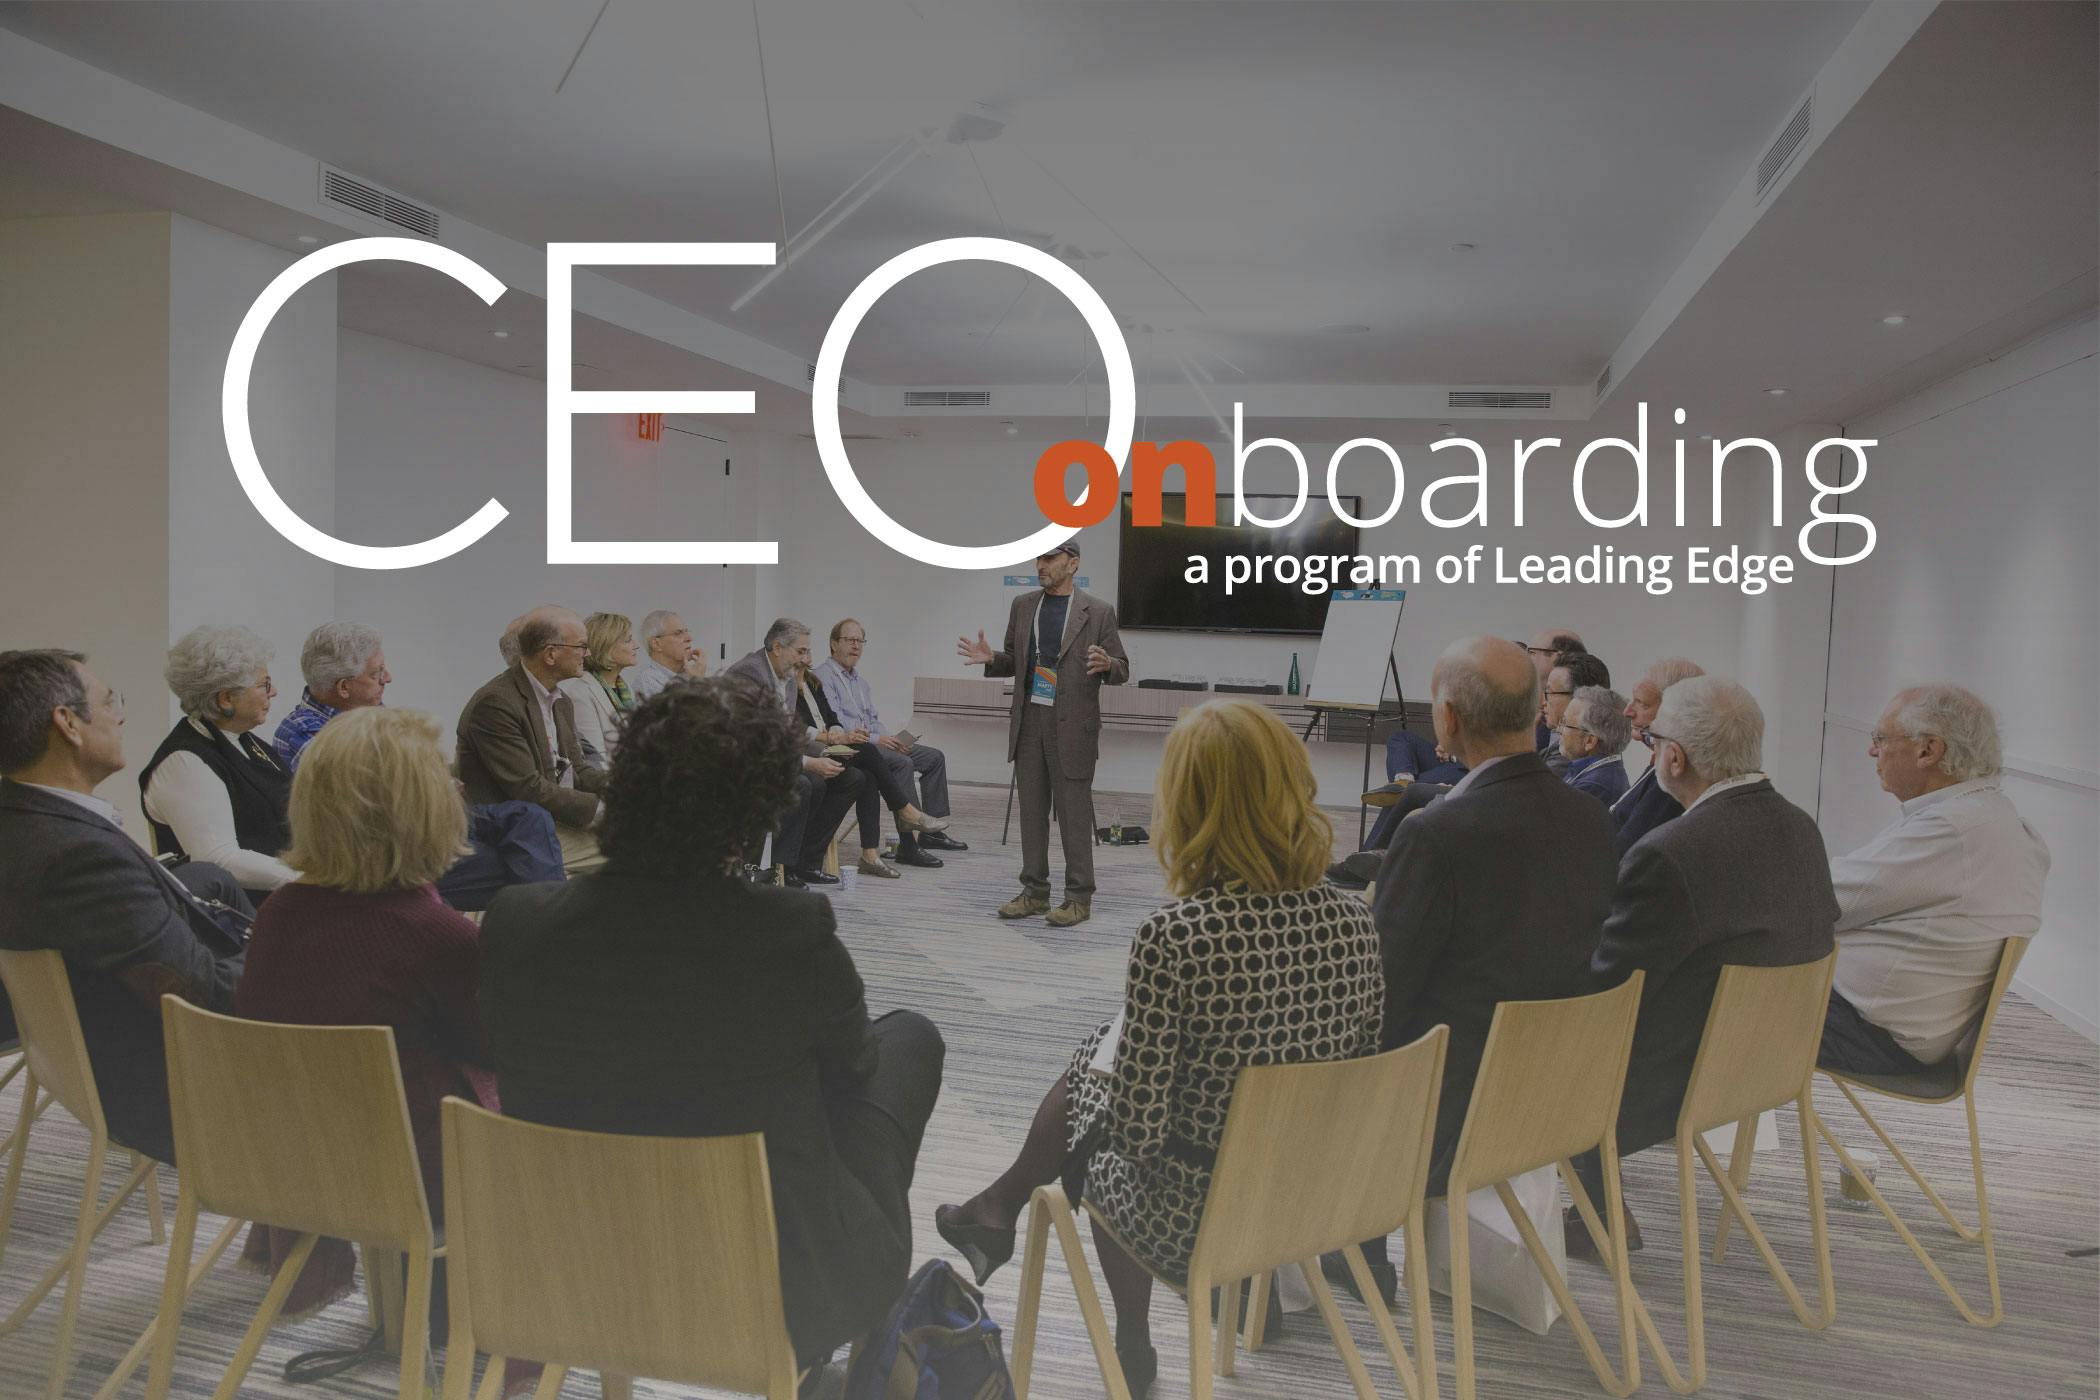 CEO Onboarding a program of Leading Edge